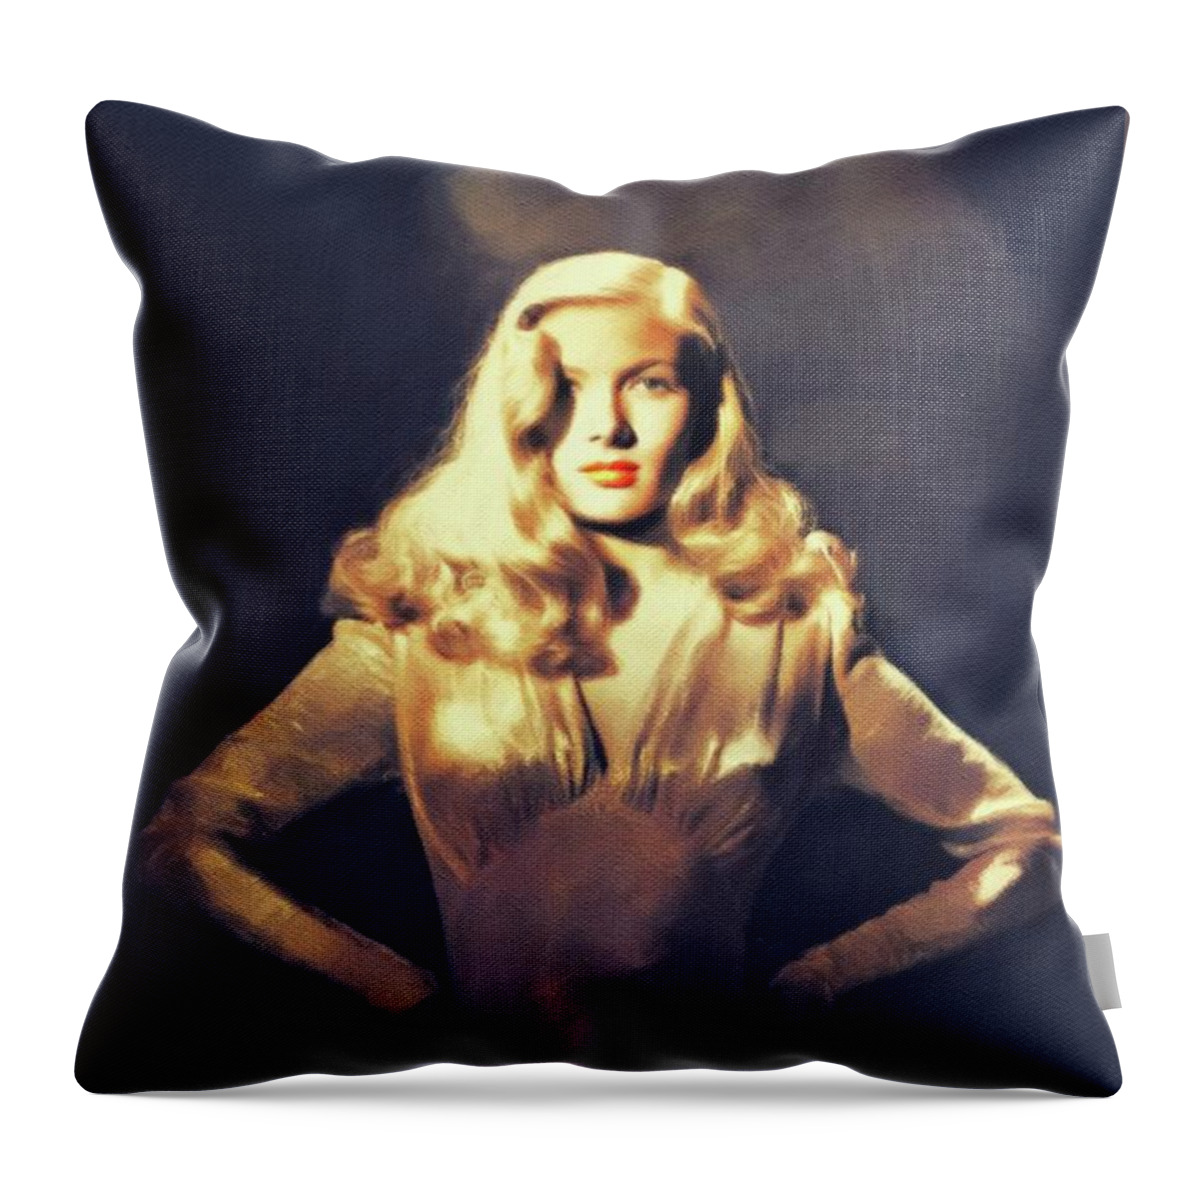 Veronica Throw Pillow featuring the painting Veronica Lake, Hollywood Legend #9 by Esoterica Art Agency